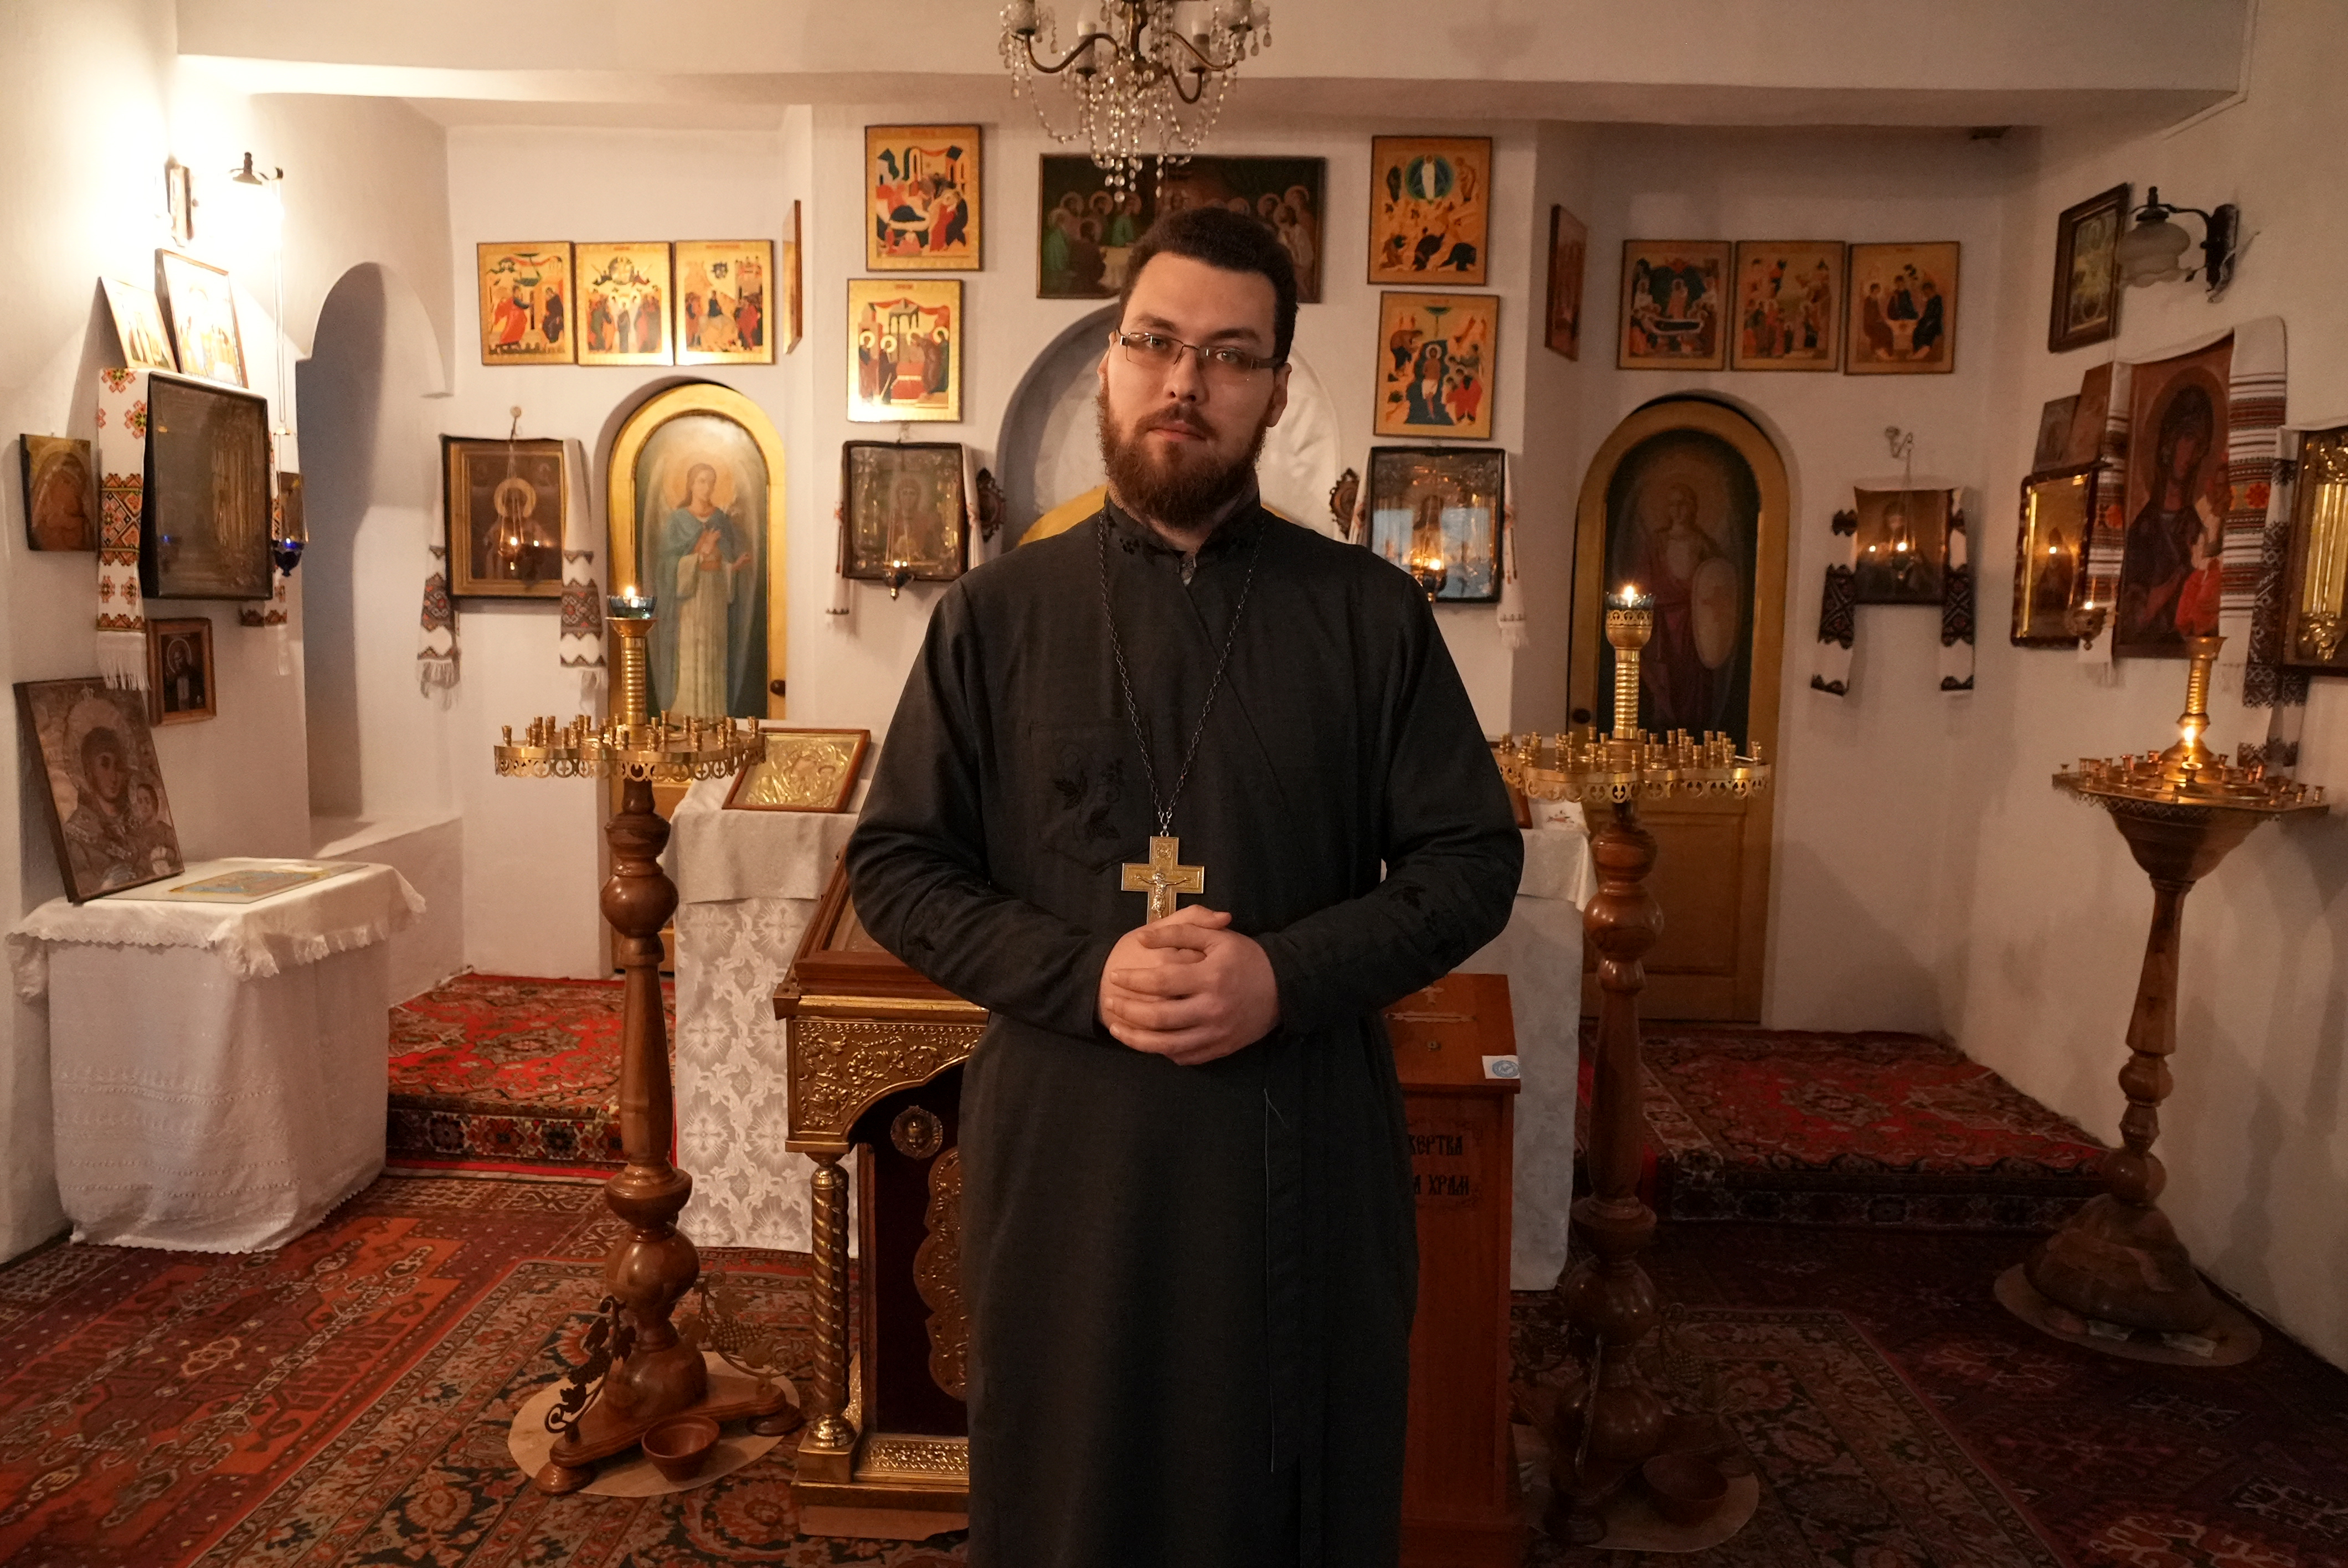 Roman Peretyatko, who serves as both a civilian and military chaplain, stands in his church, Archangel St. Michael, in Mariupol, Ukraine. 